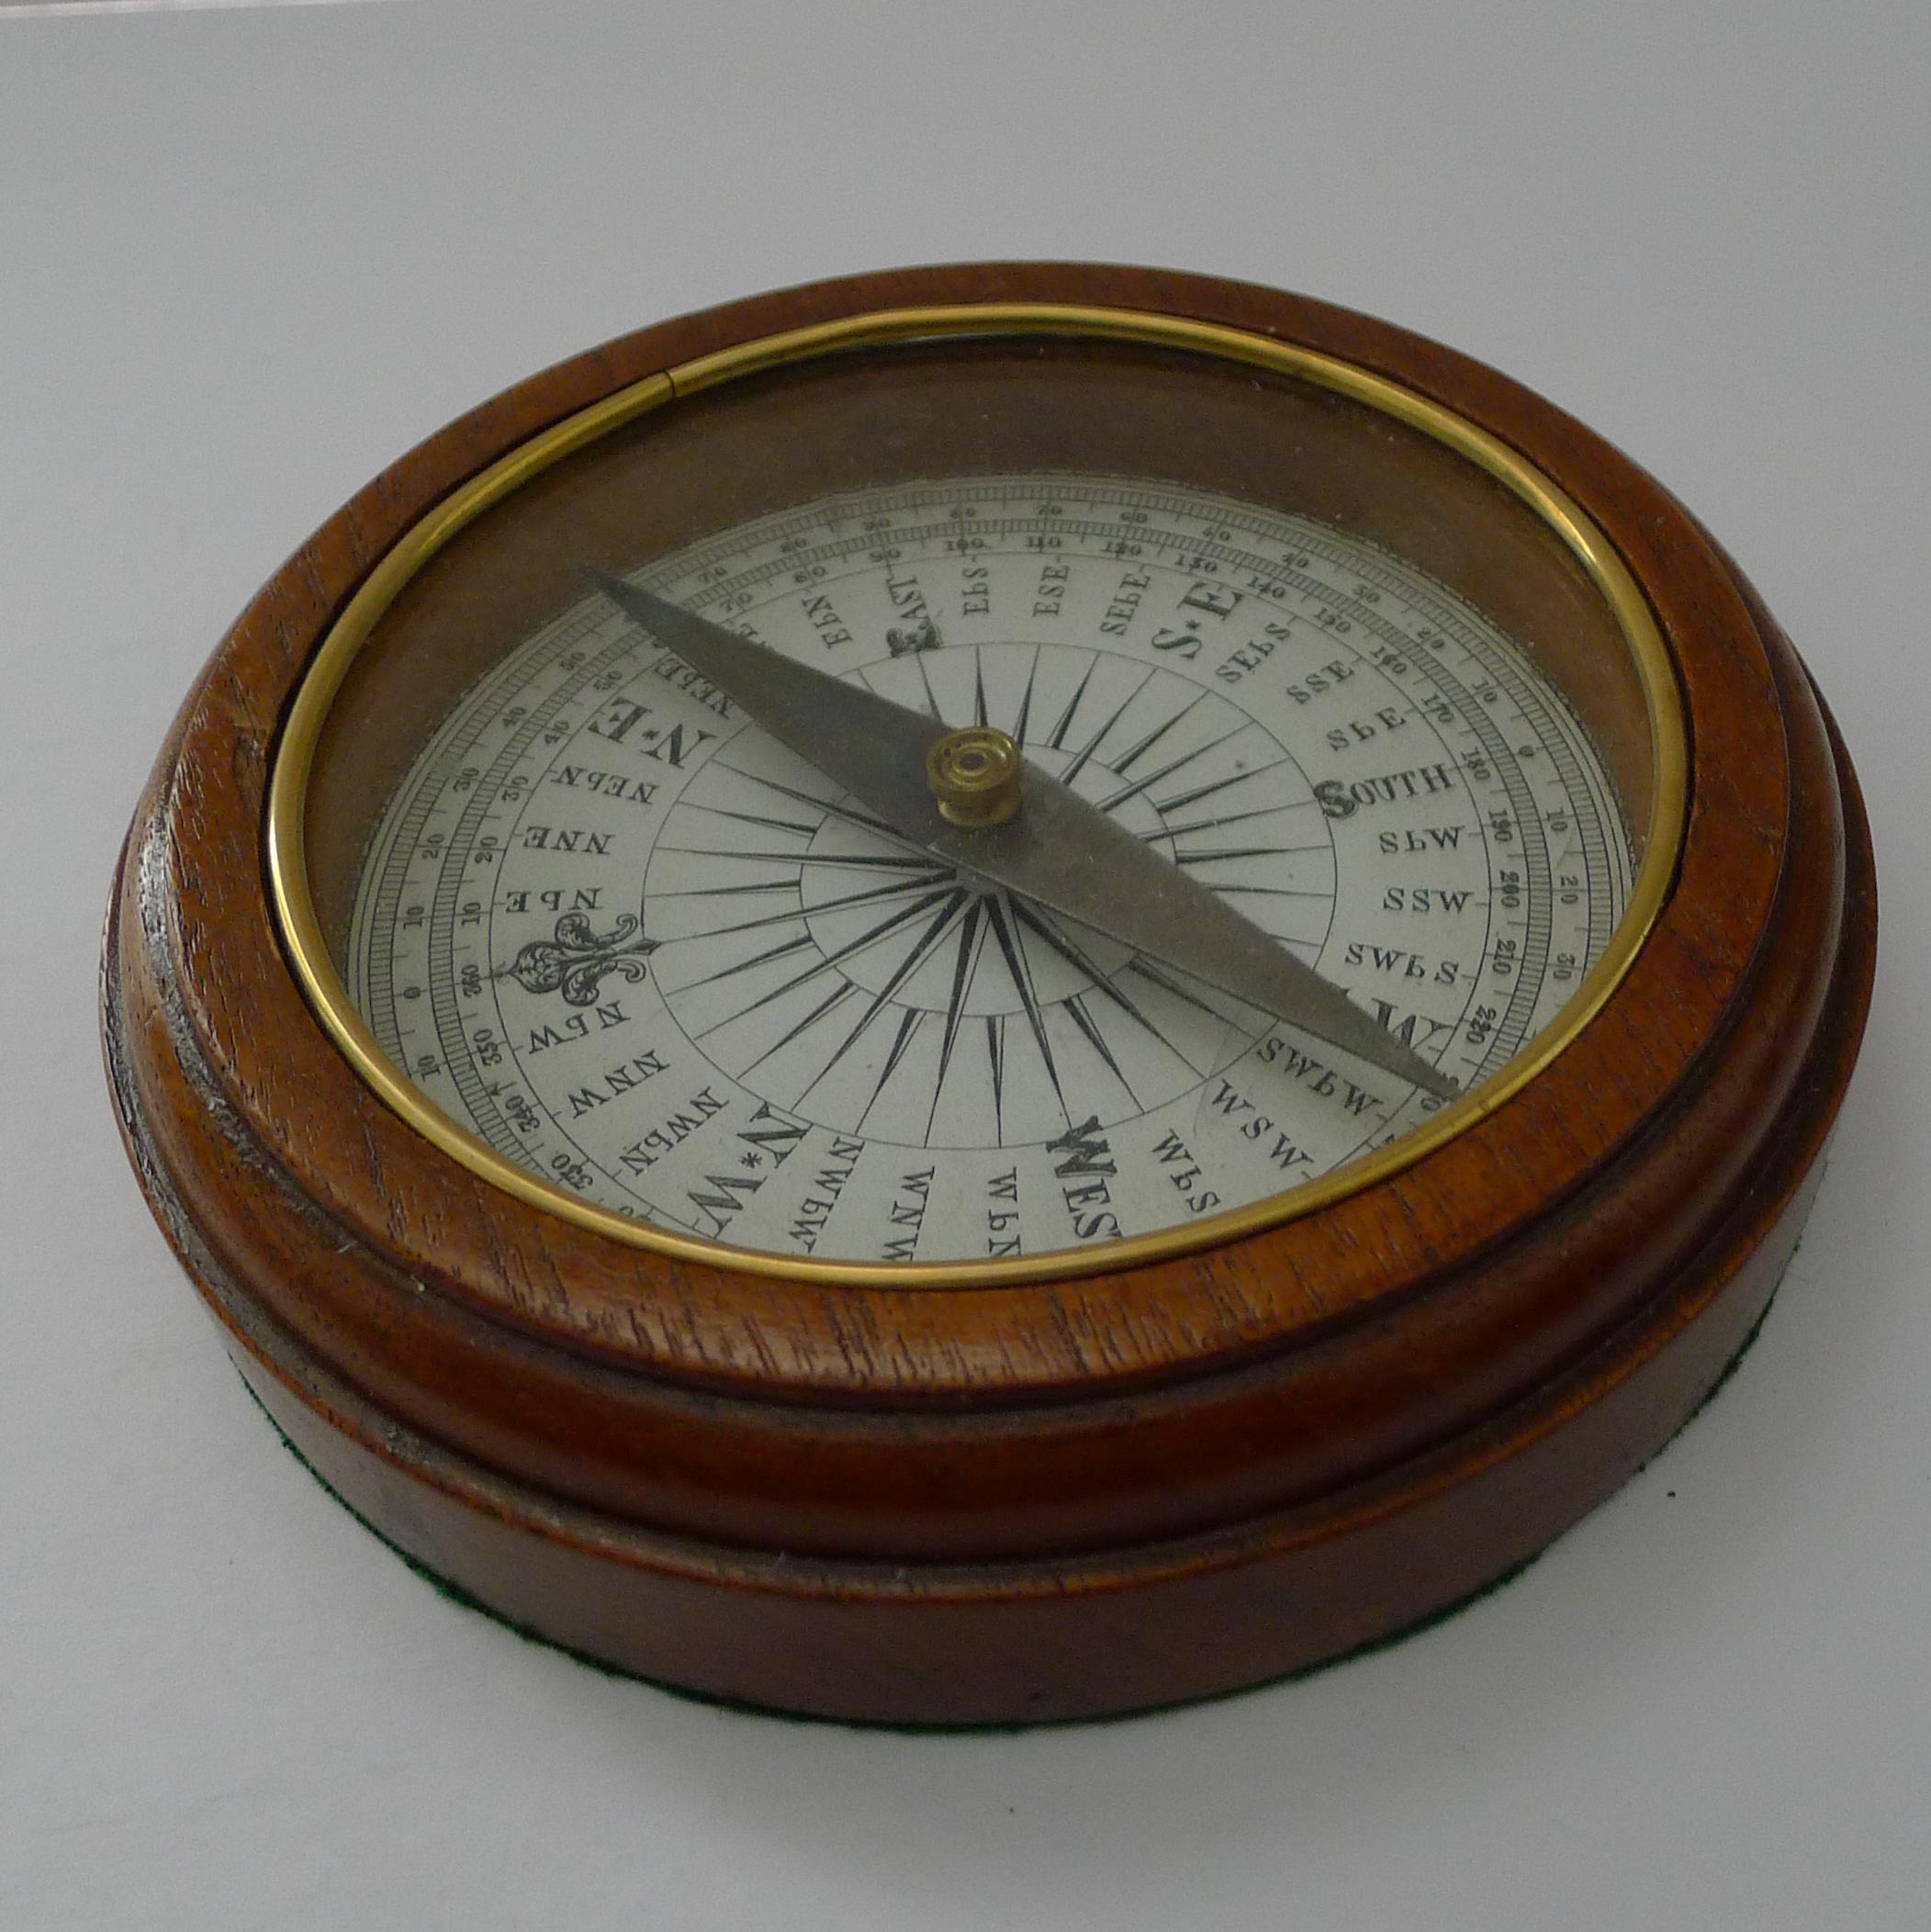 A magnificent large English desk compass measuring 6 1/2